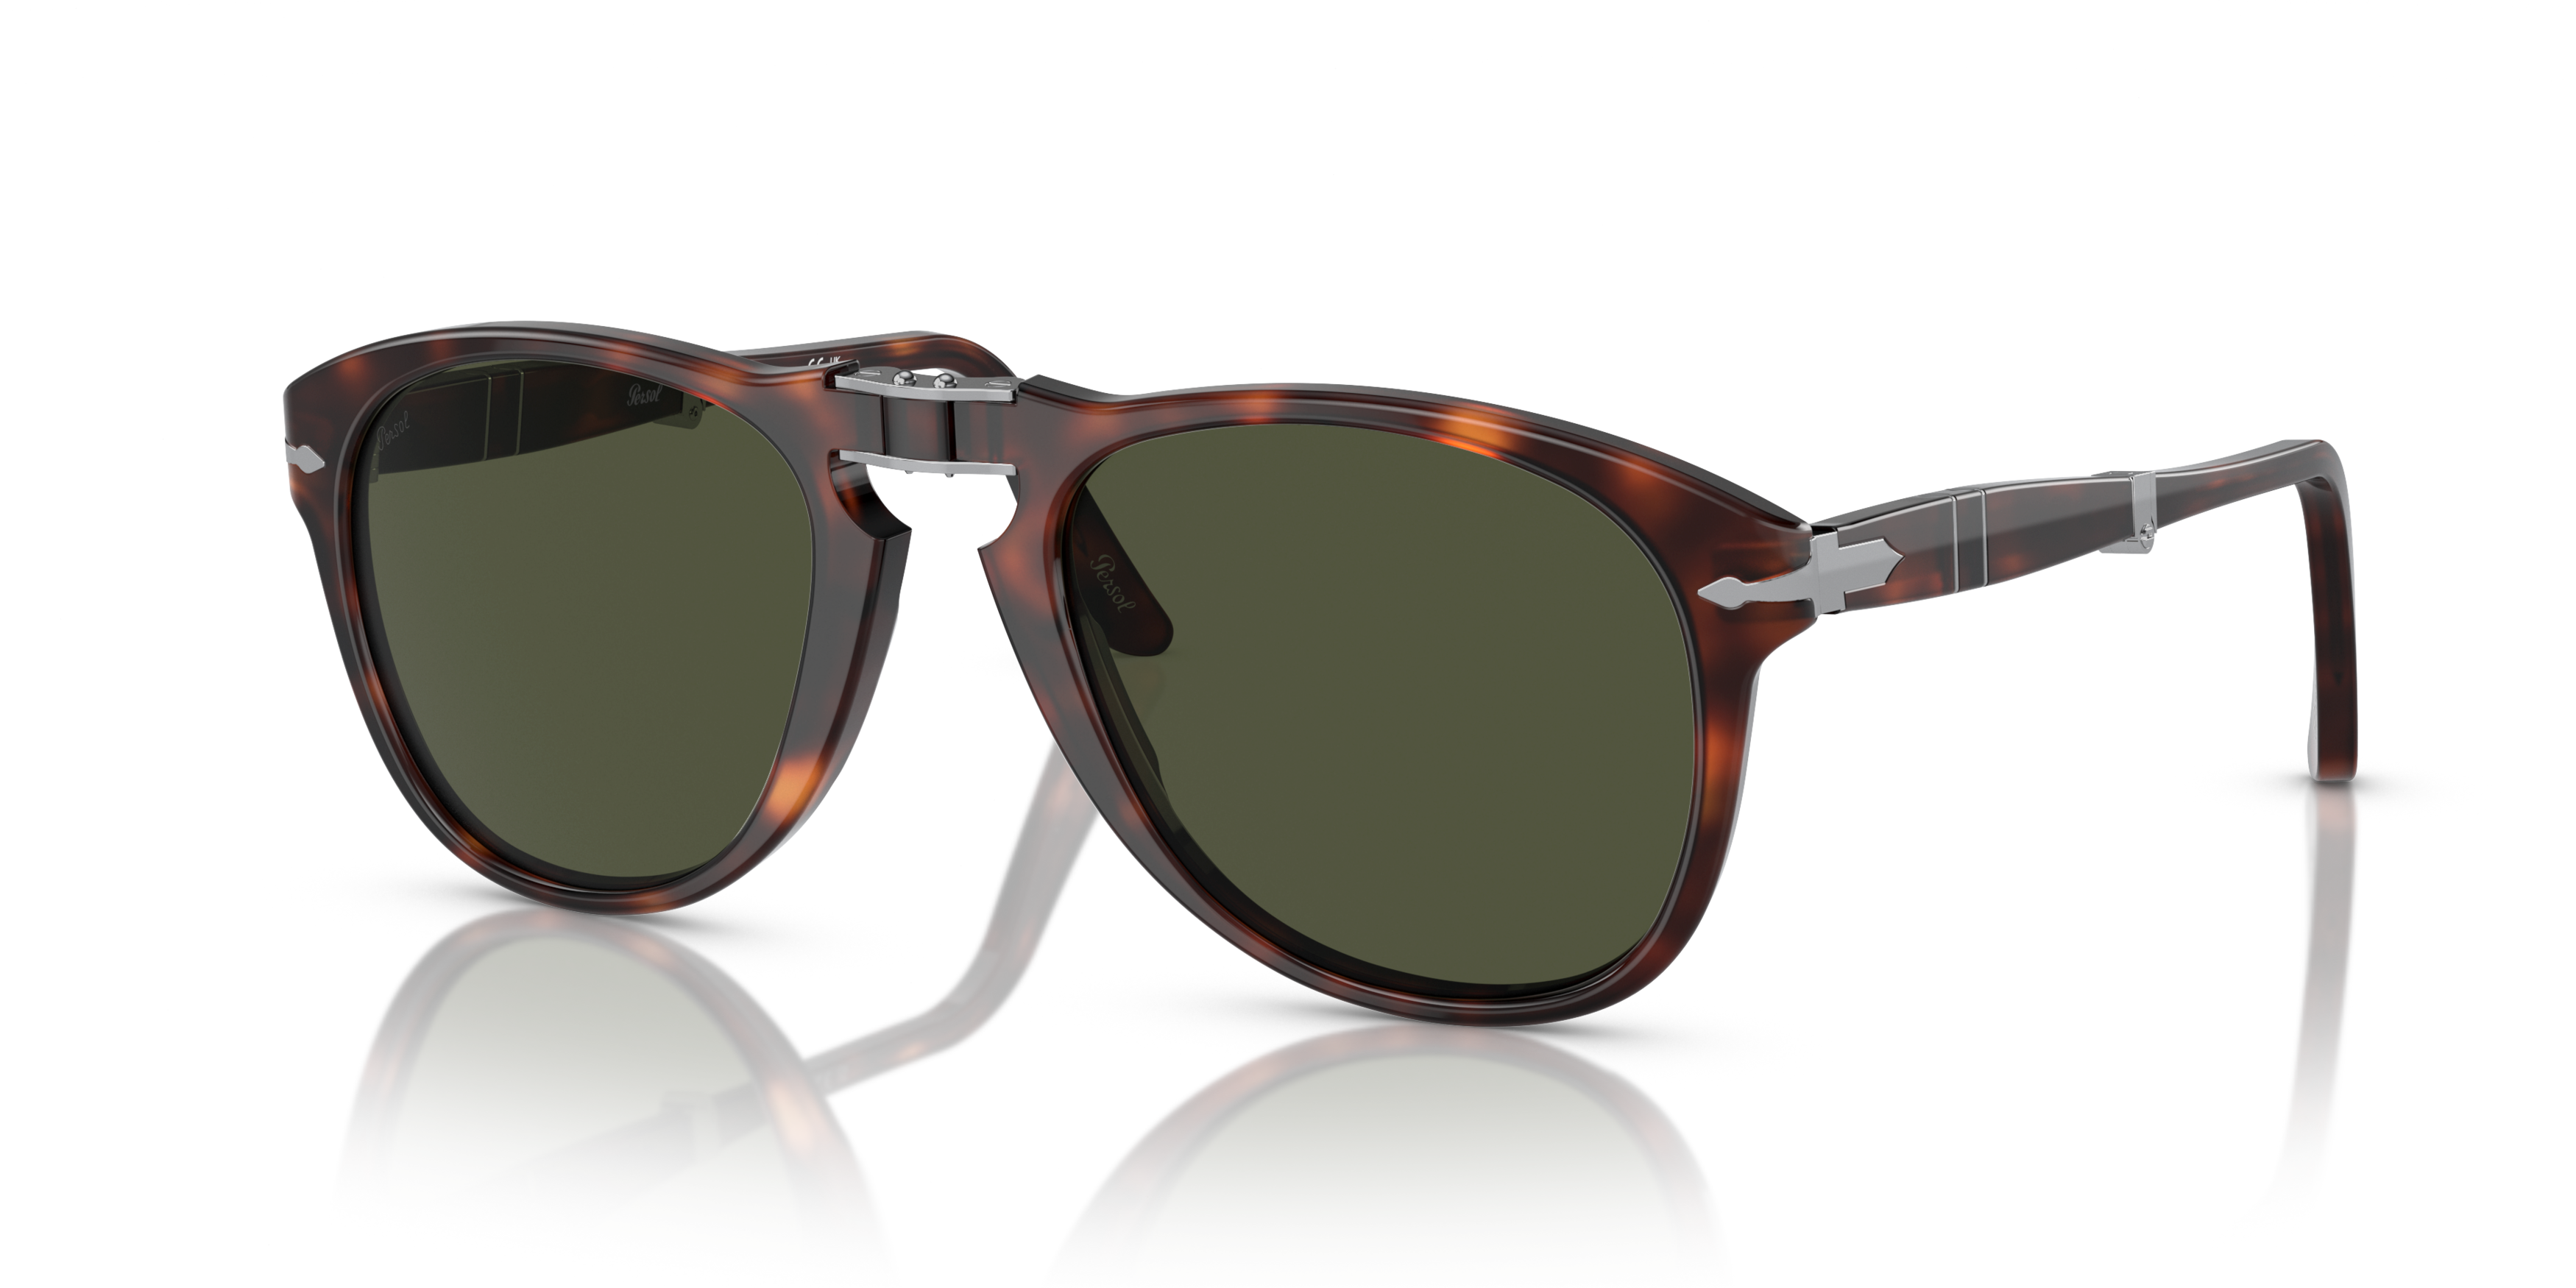 [products.image.angle_left01] Persol 0PO0714 24/31